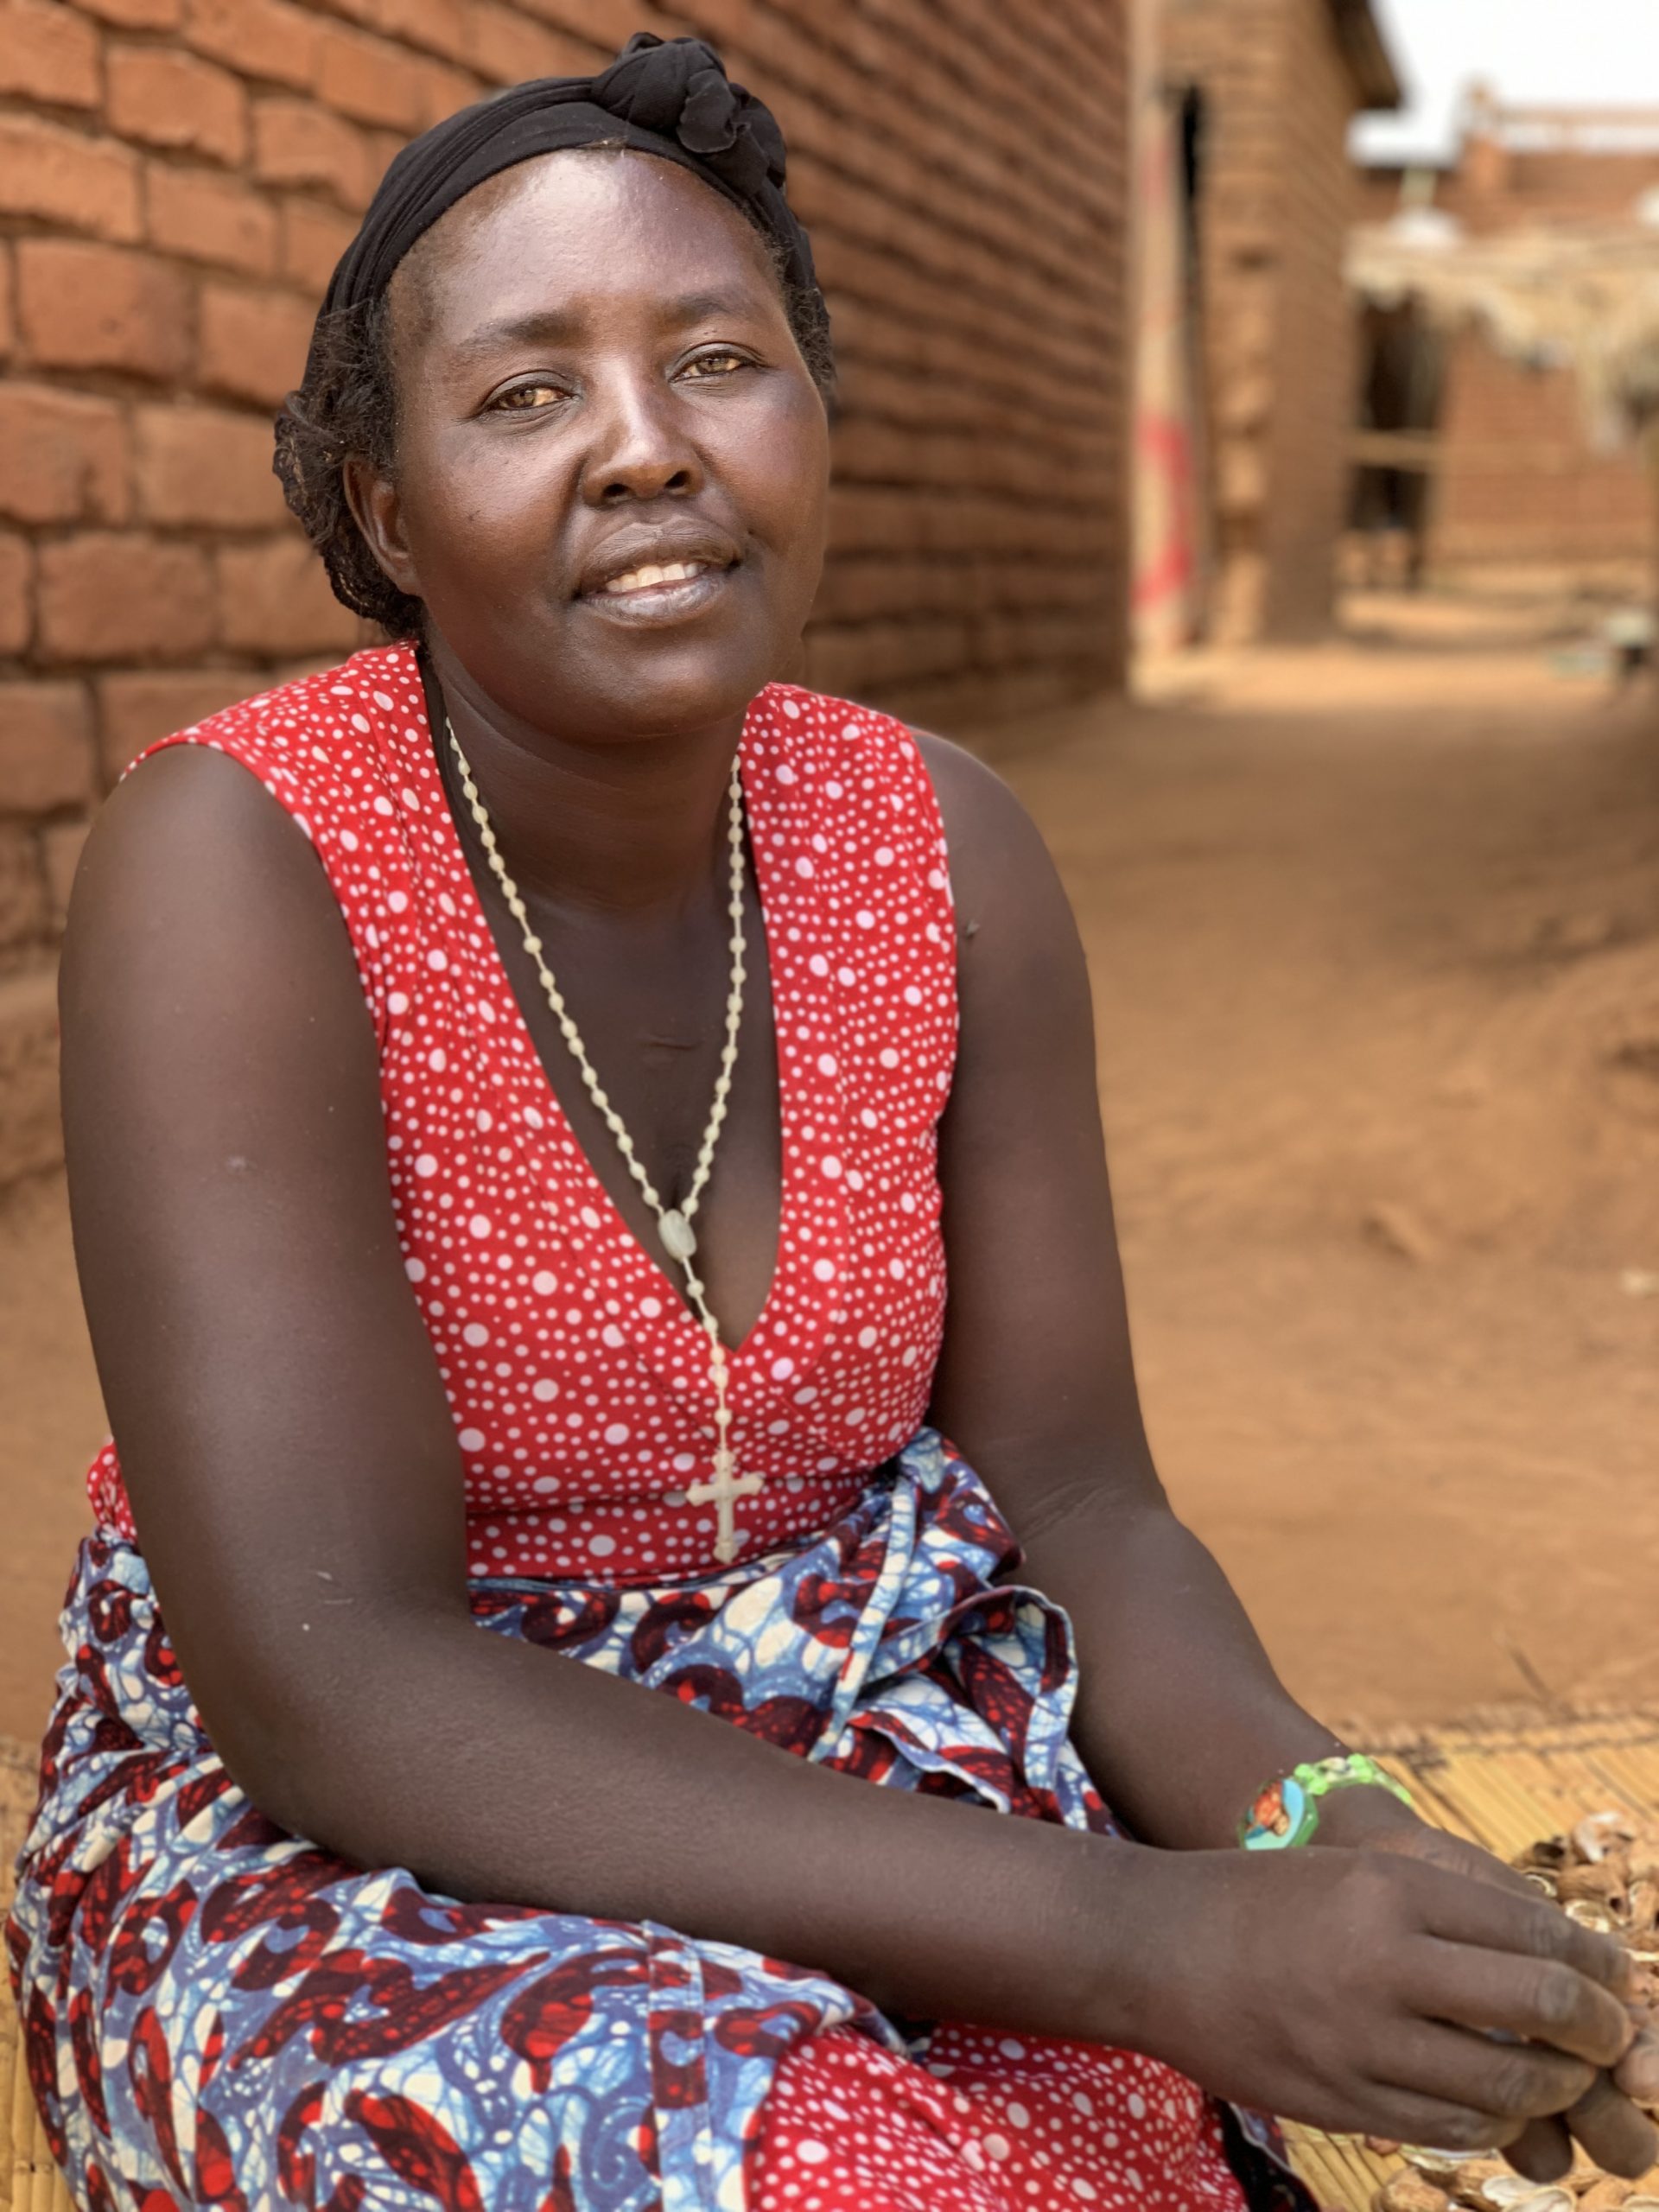 Anita Chitaya, an malwian woman sits in front of a clay brick house